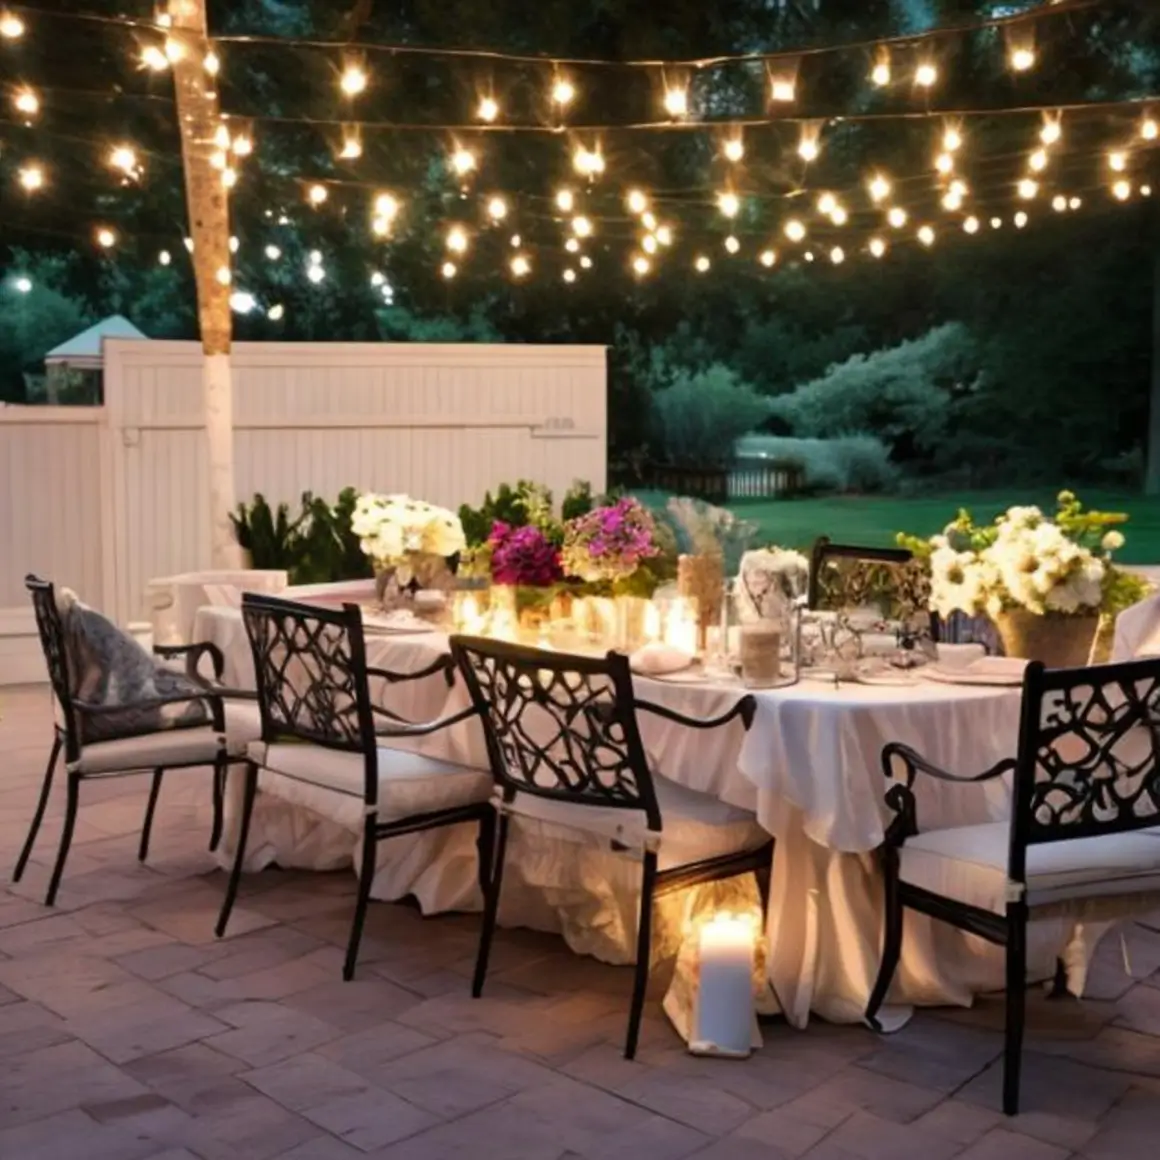 Set Up a Cosy Outdoor Seating Arrangement for New Year Eve